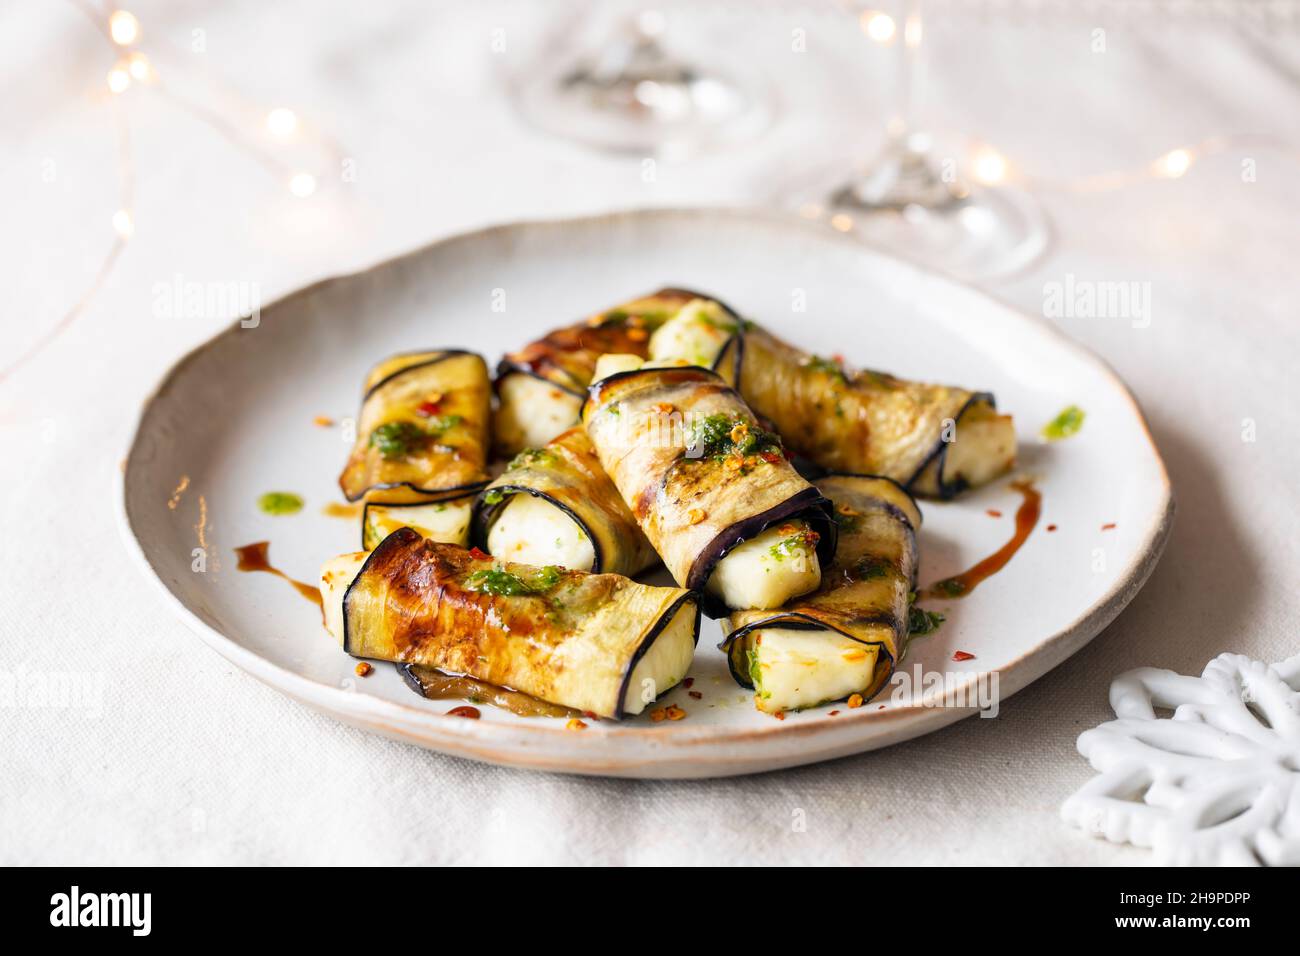 Vegetarian canapes of halloumi cheese wrapped in grilled aubergine Stock Photo